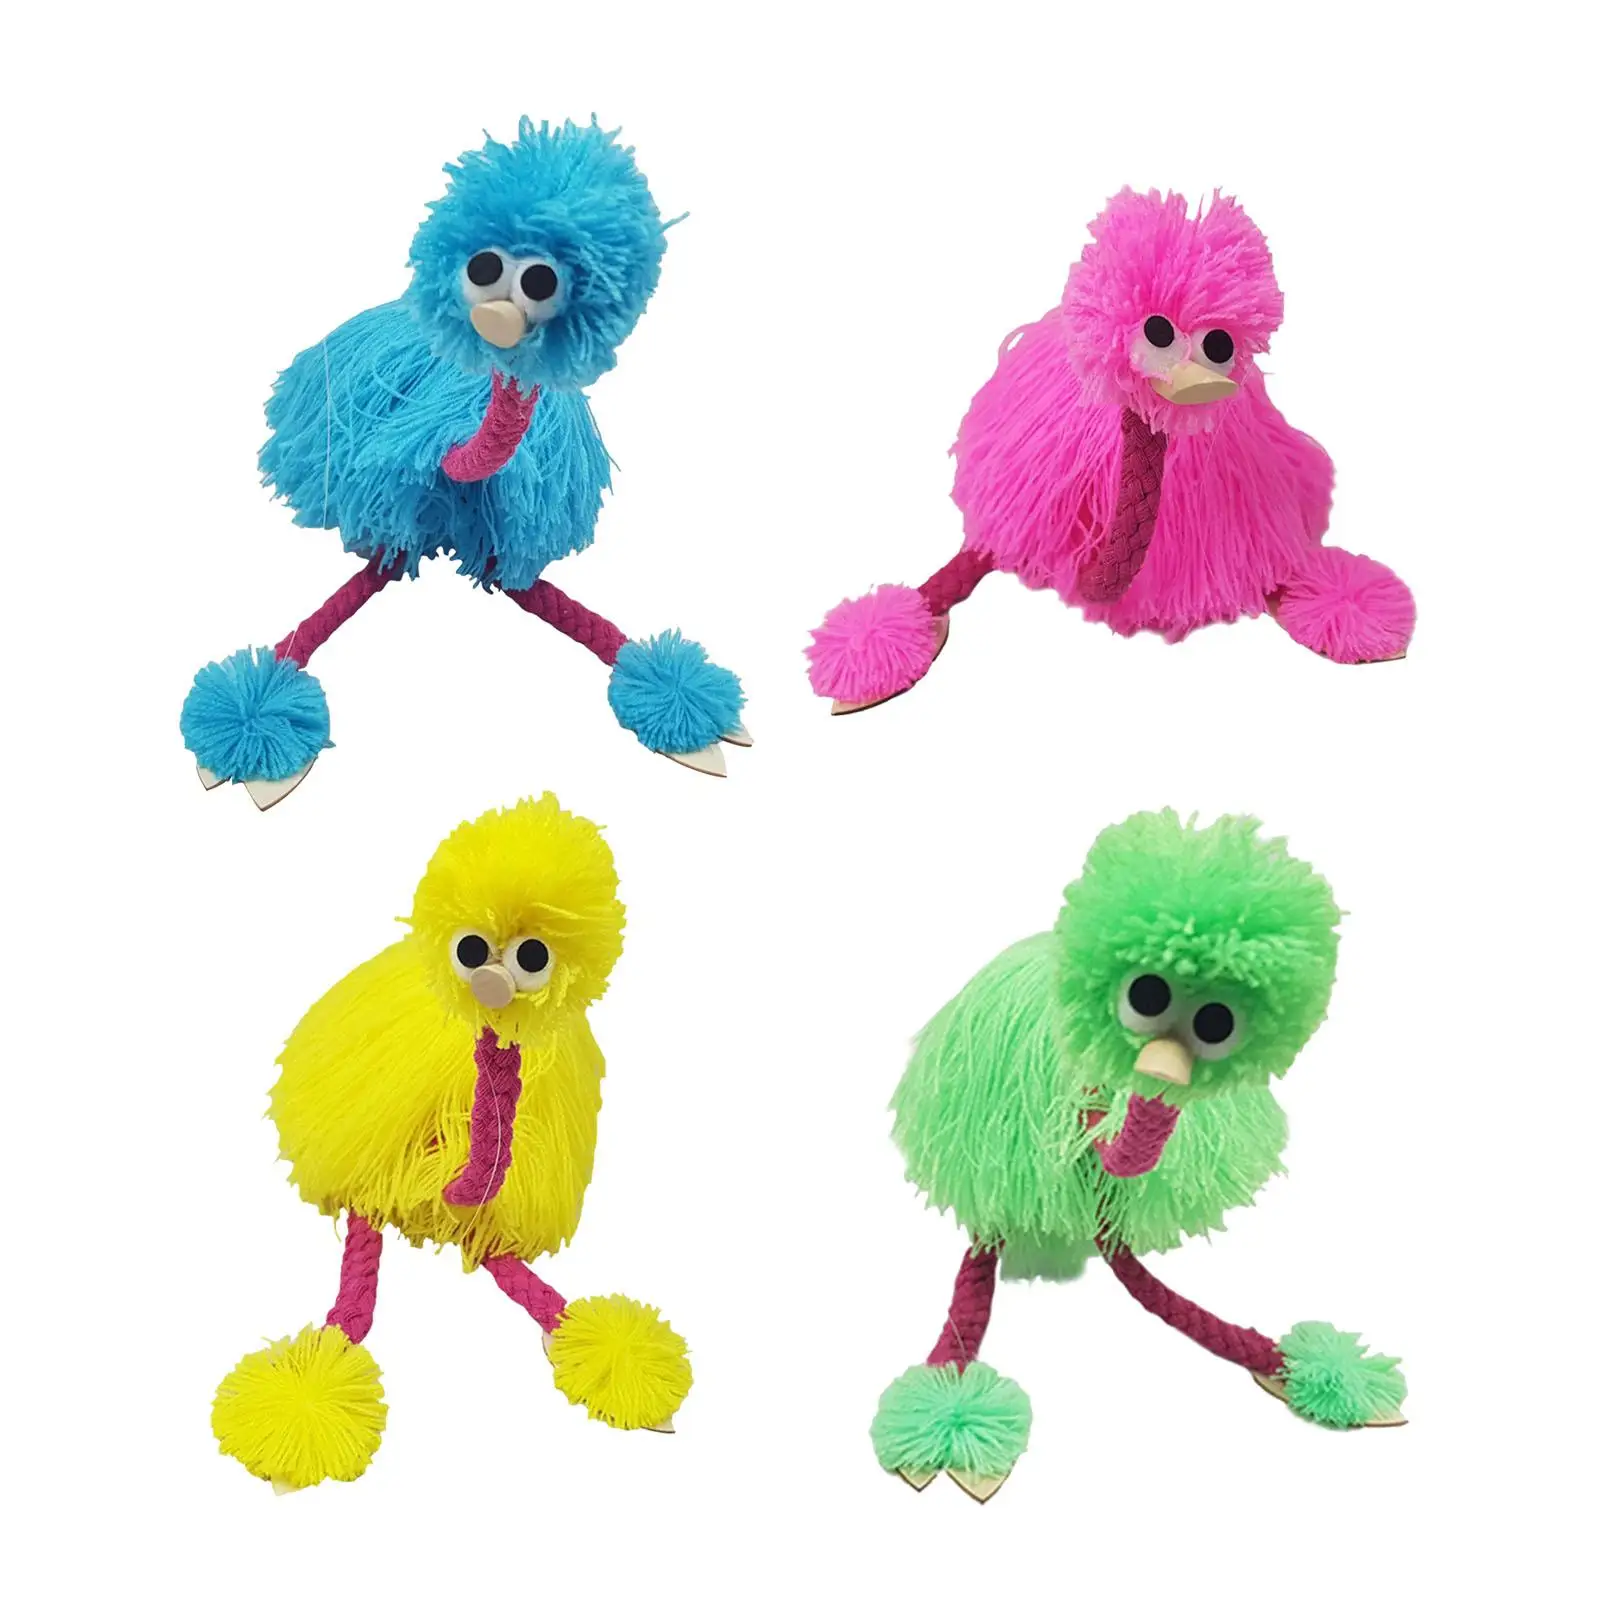 Marionette Toy String Puppet Develops Motor Skills Interactive Puppets Dolls